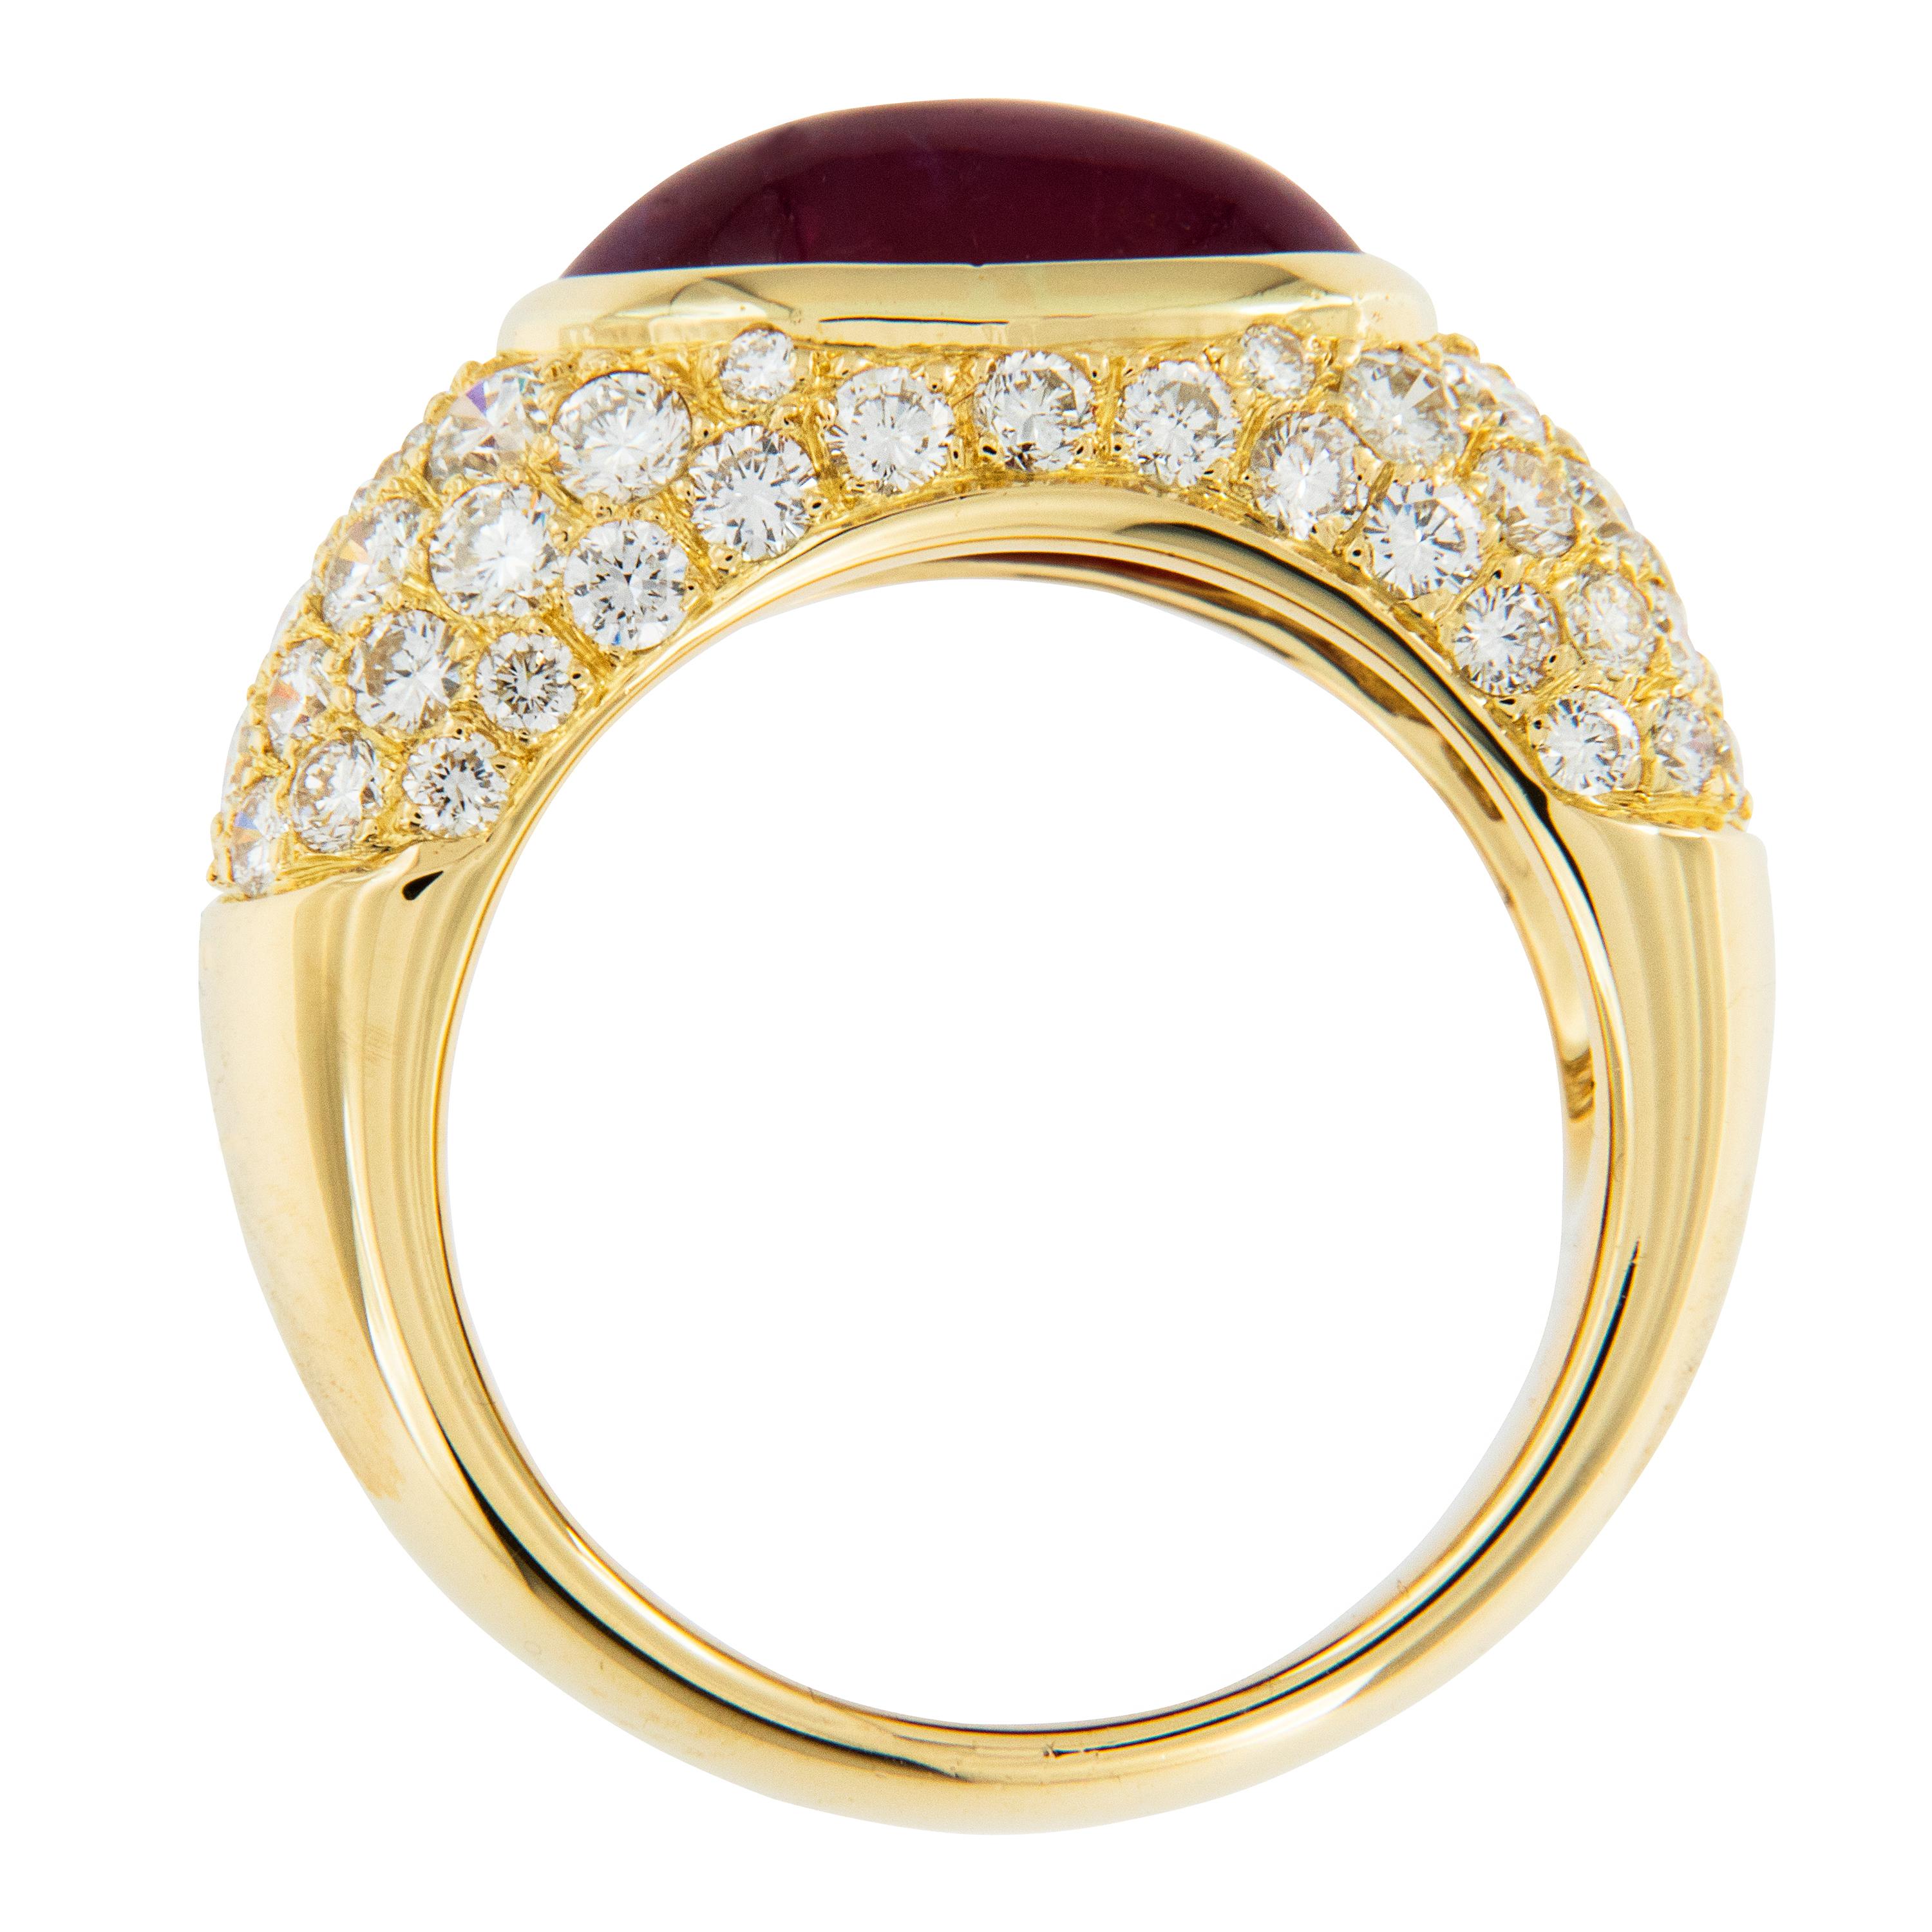 The timeless Bombe' style of this ring will never go out of style! Comprised of 18 karat yellow gold centered around a gemmy oval cabochon ruby = 5.22 Carat & 64 rbc diamonds pave' set = 1.78 Cttw. The smooth rounded look & exceptional color of this